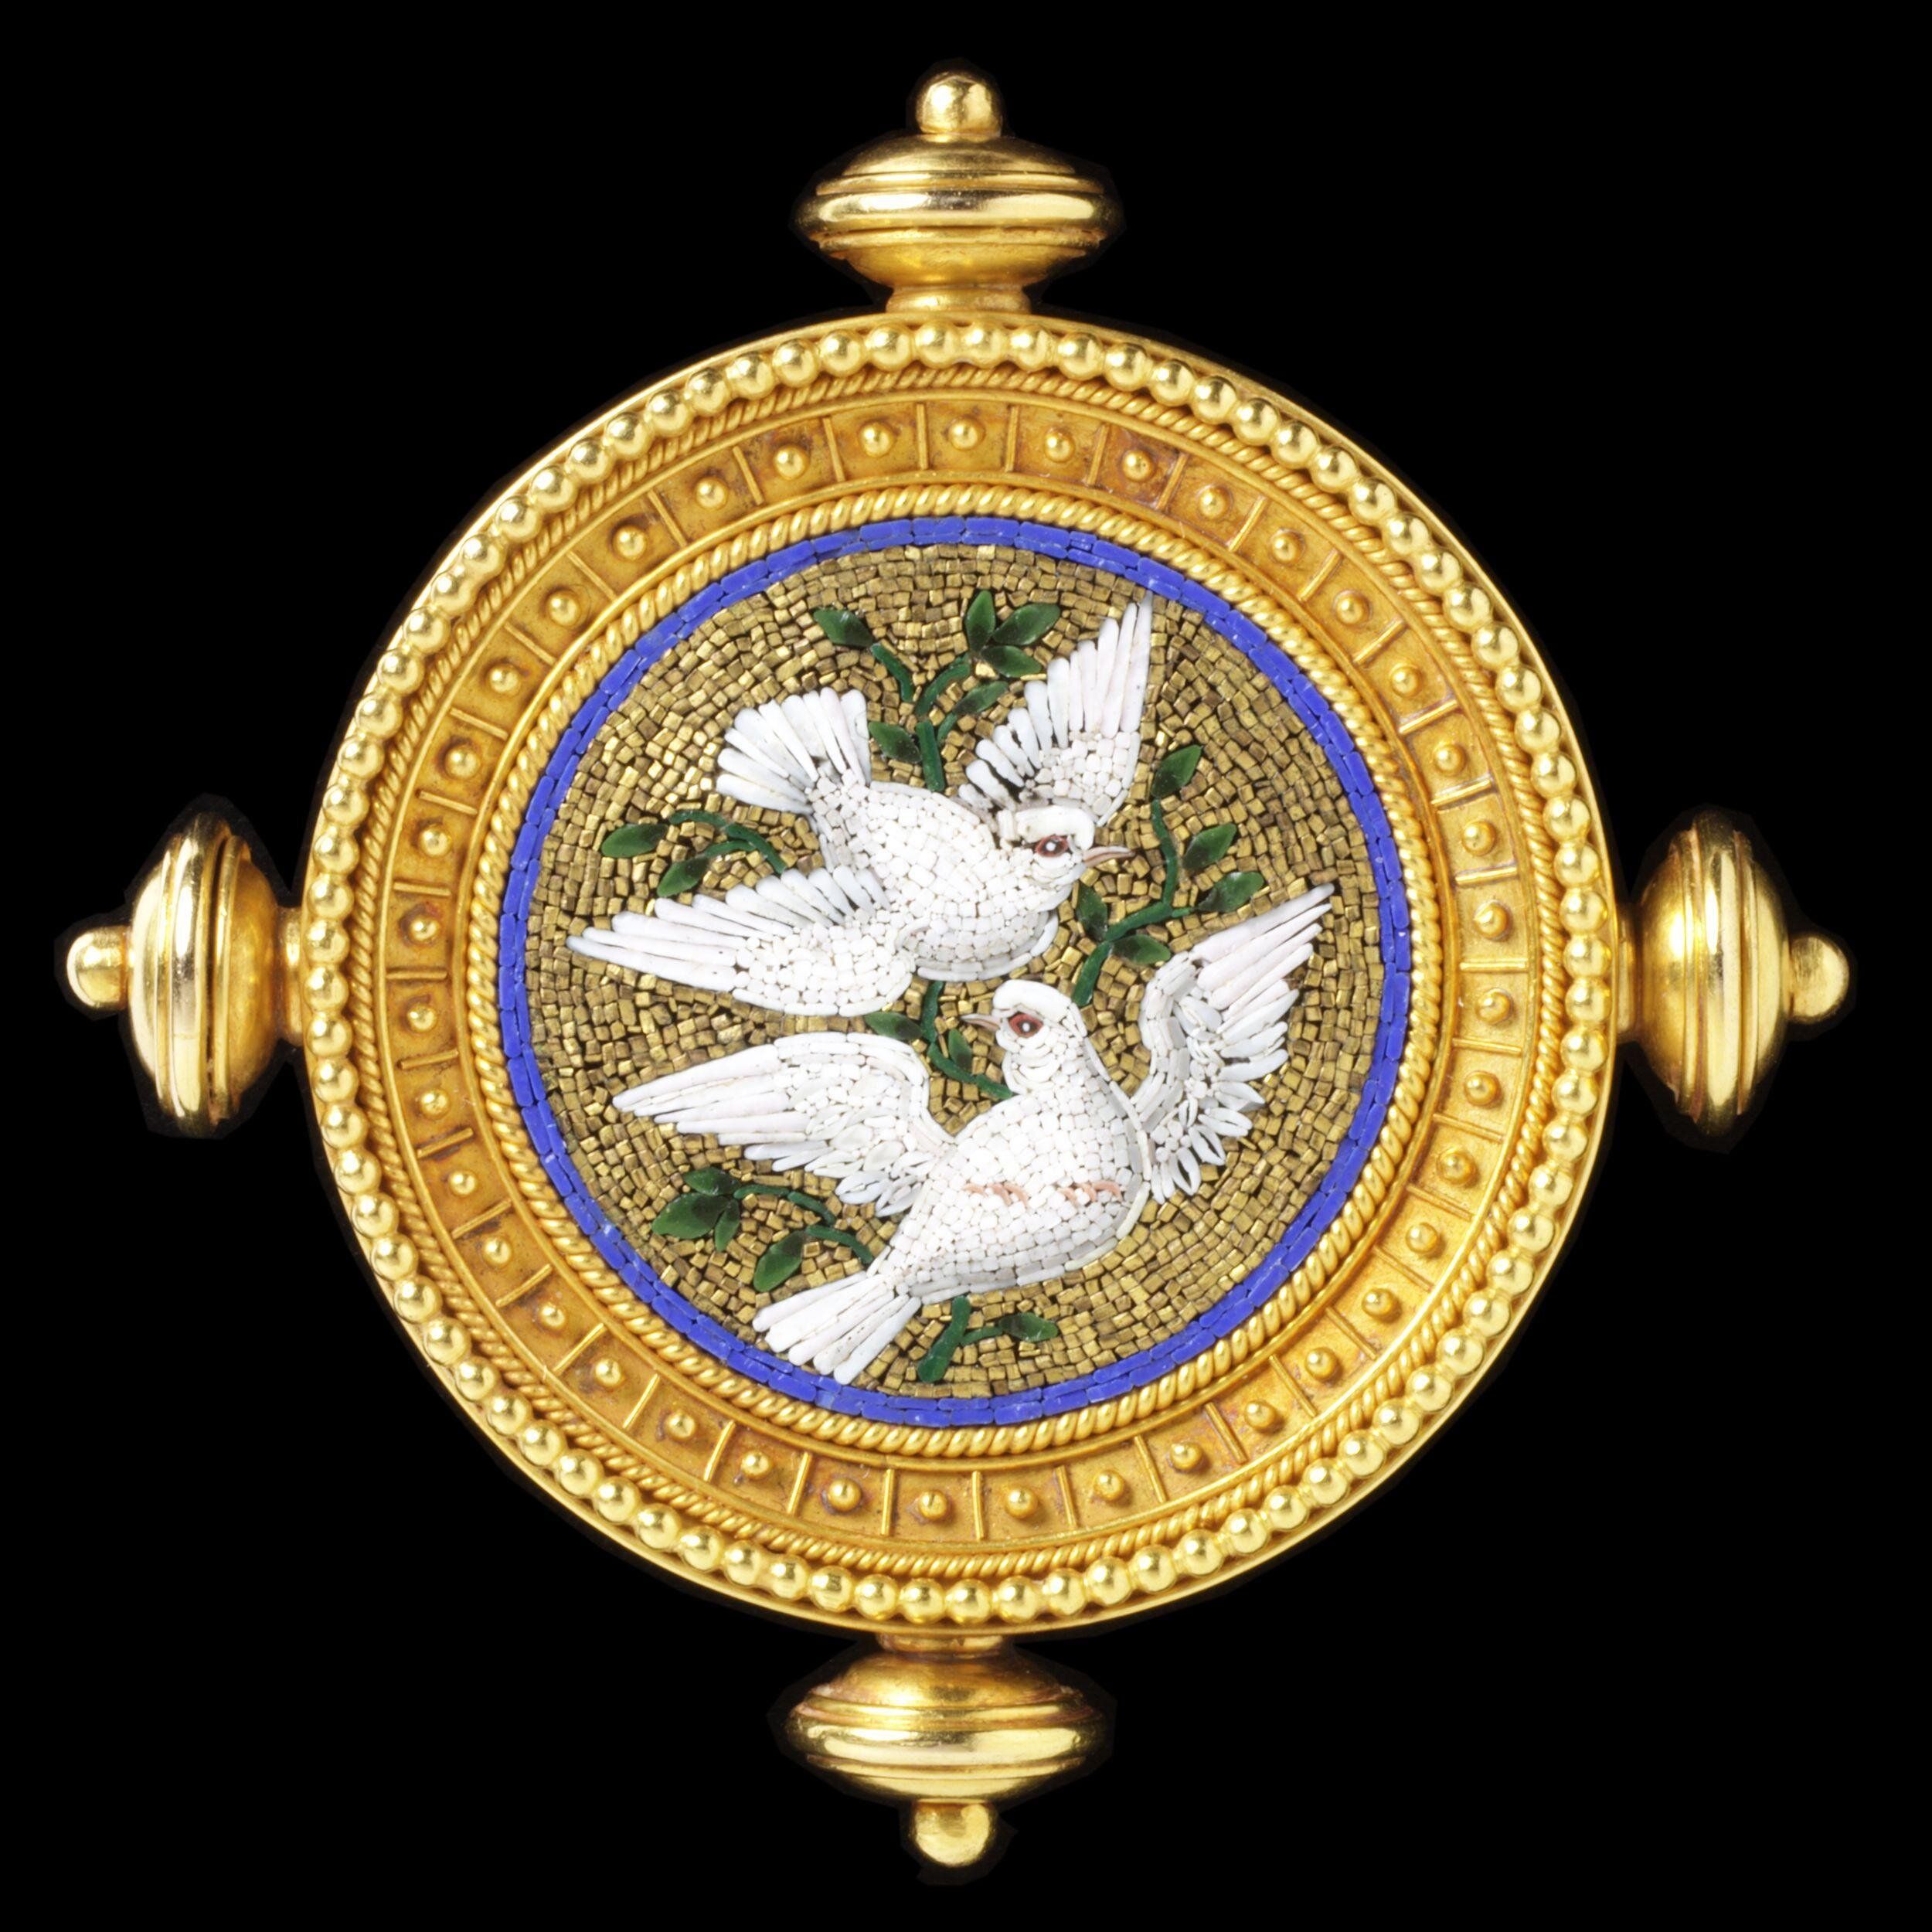 Micromosaic brooch of two flying doves, 1860. The Victoria & Albert Museum.